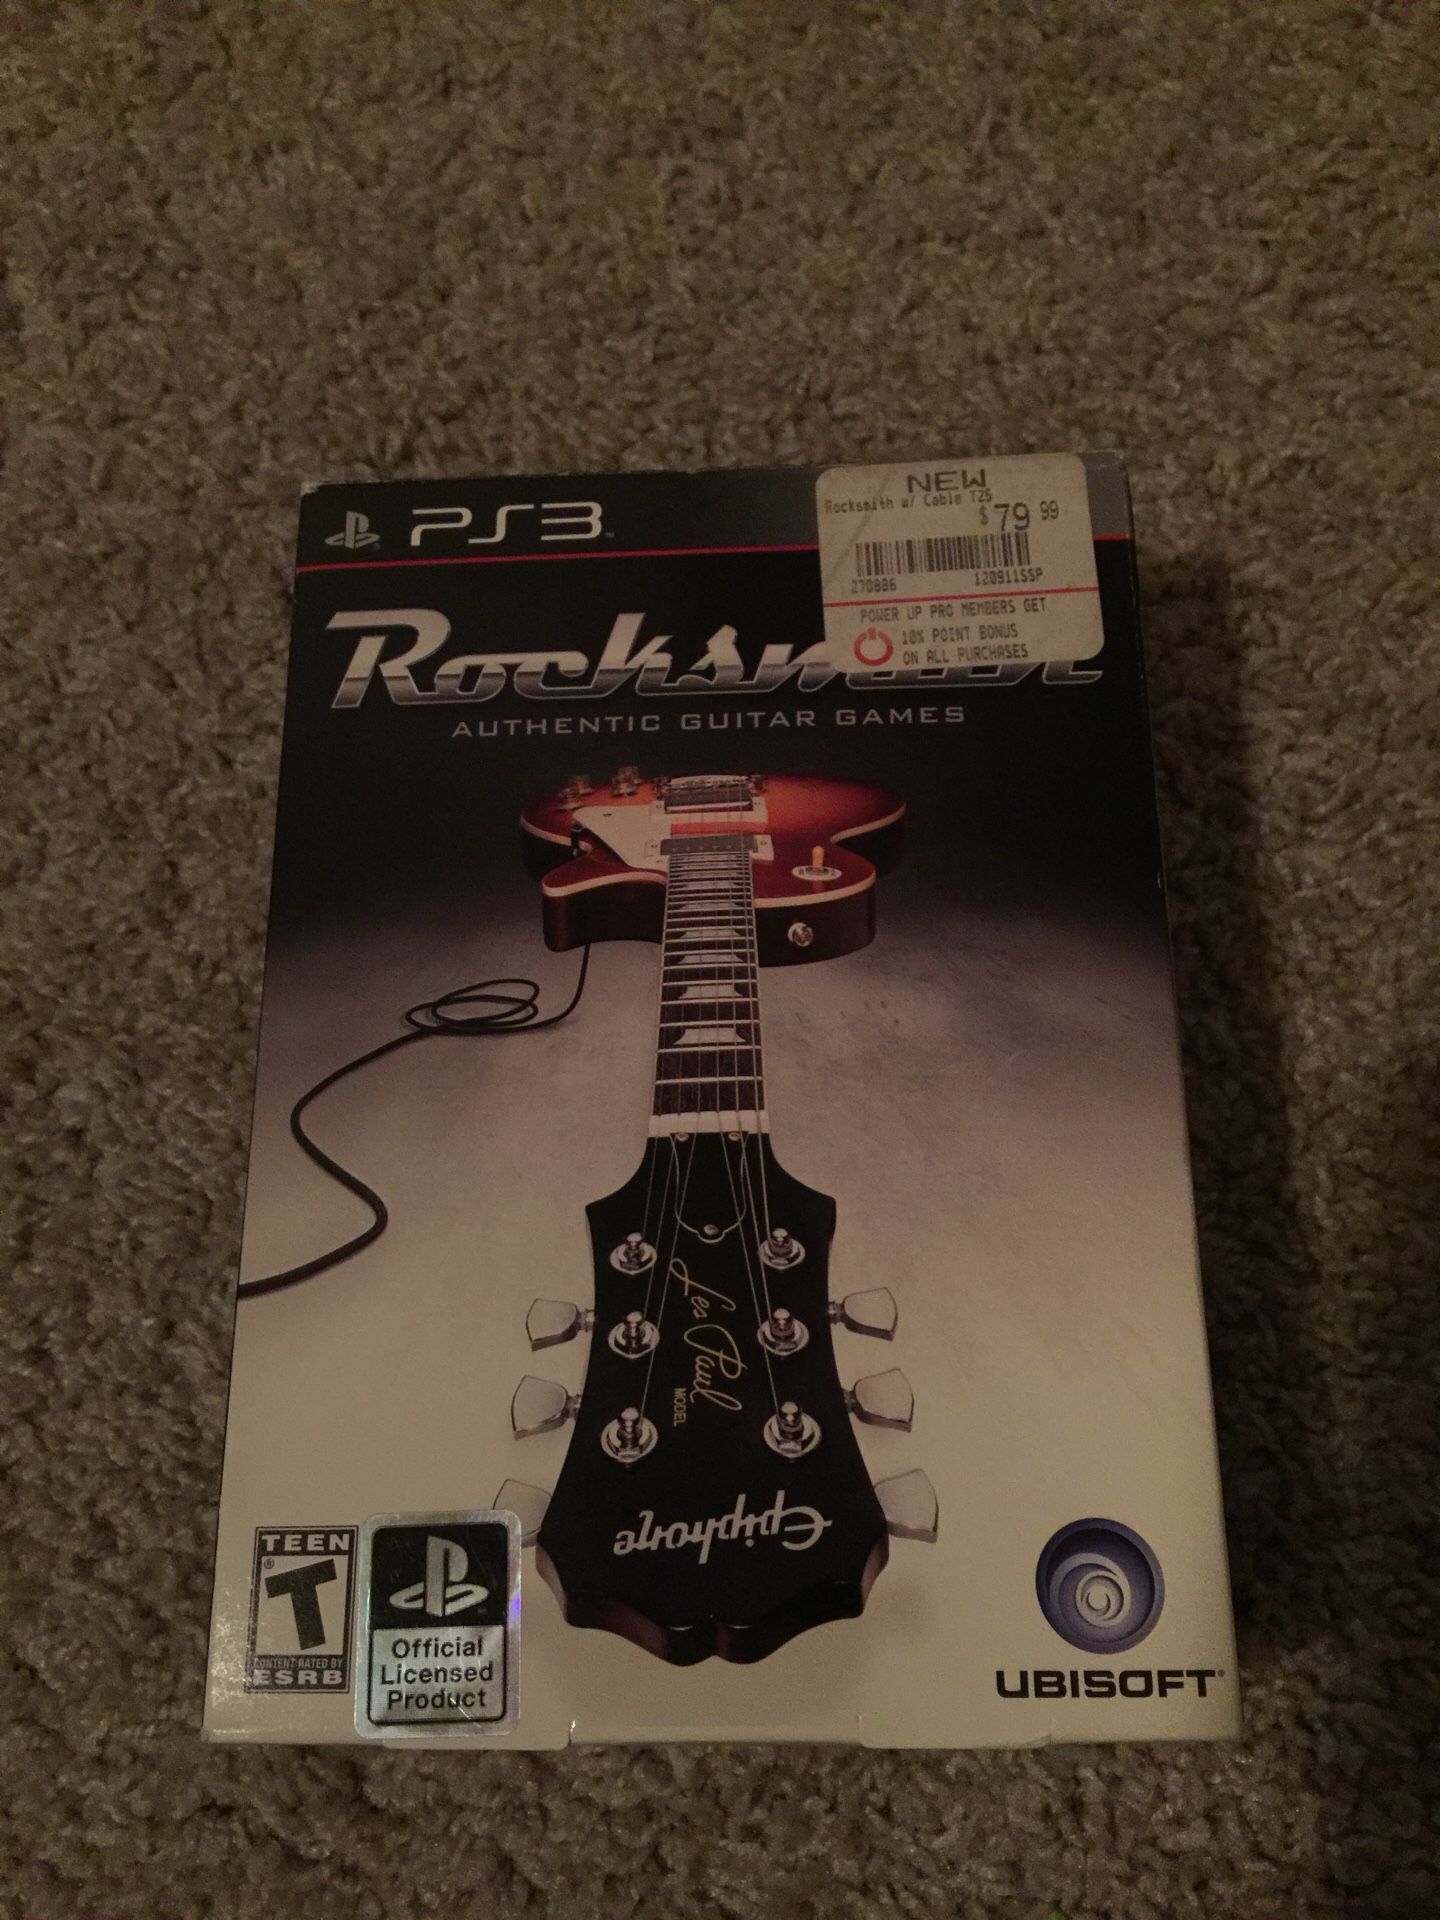 PS3 Rocksmith guitar game plus guitar cable